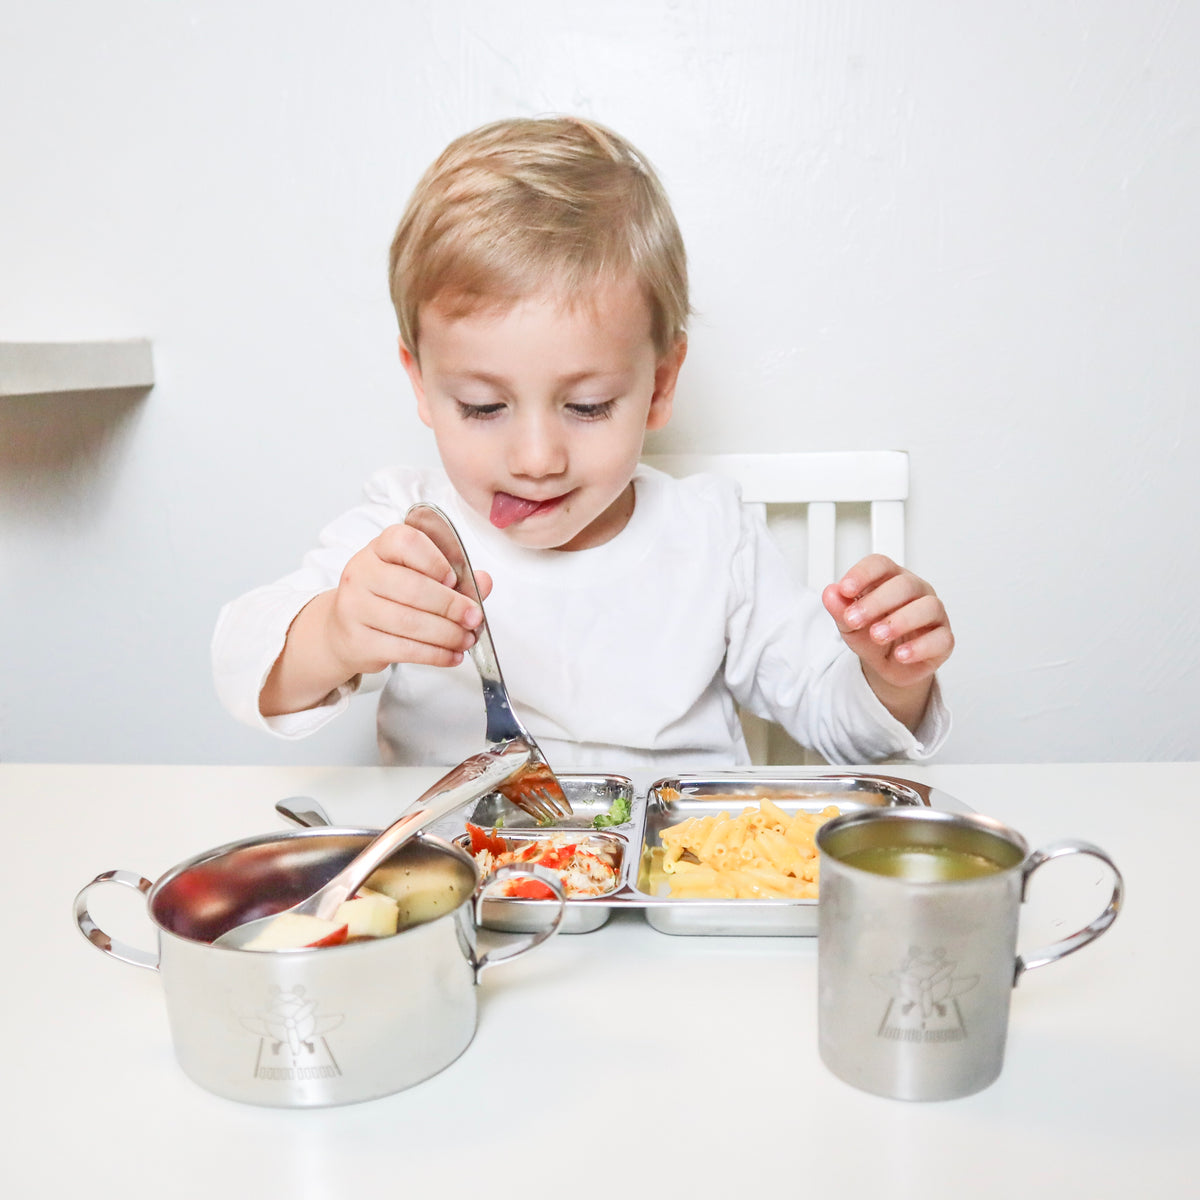 A toddler boy is eating from a set of stainless steel dinnerware consists of a stainless steel divided tray, a stainless steel bowl with handles, and a stainless steel cup with handle.